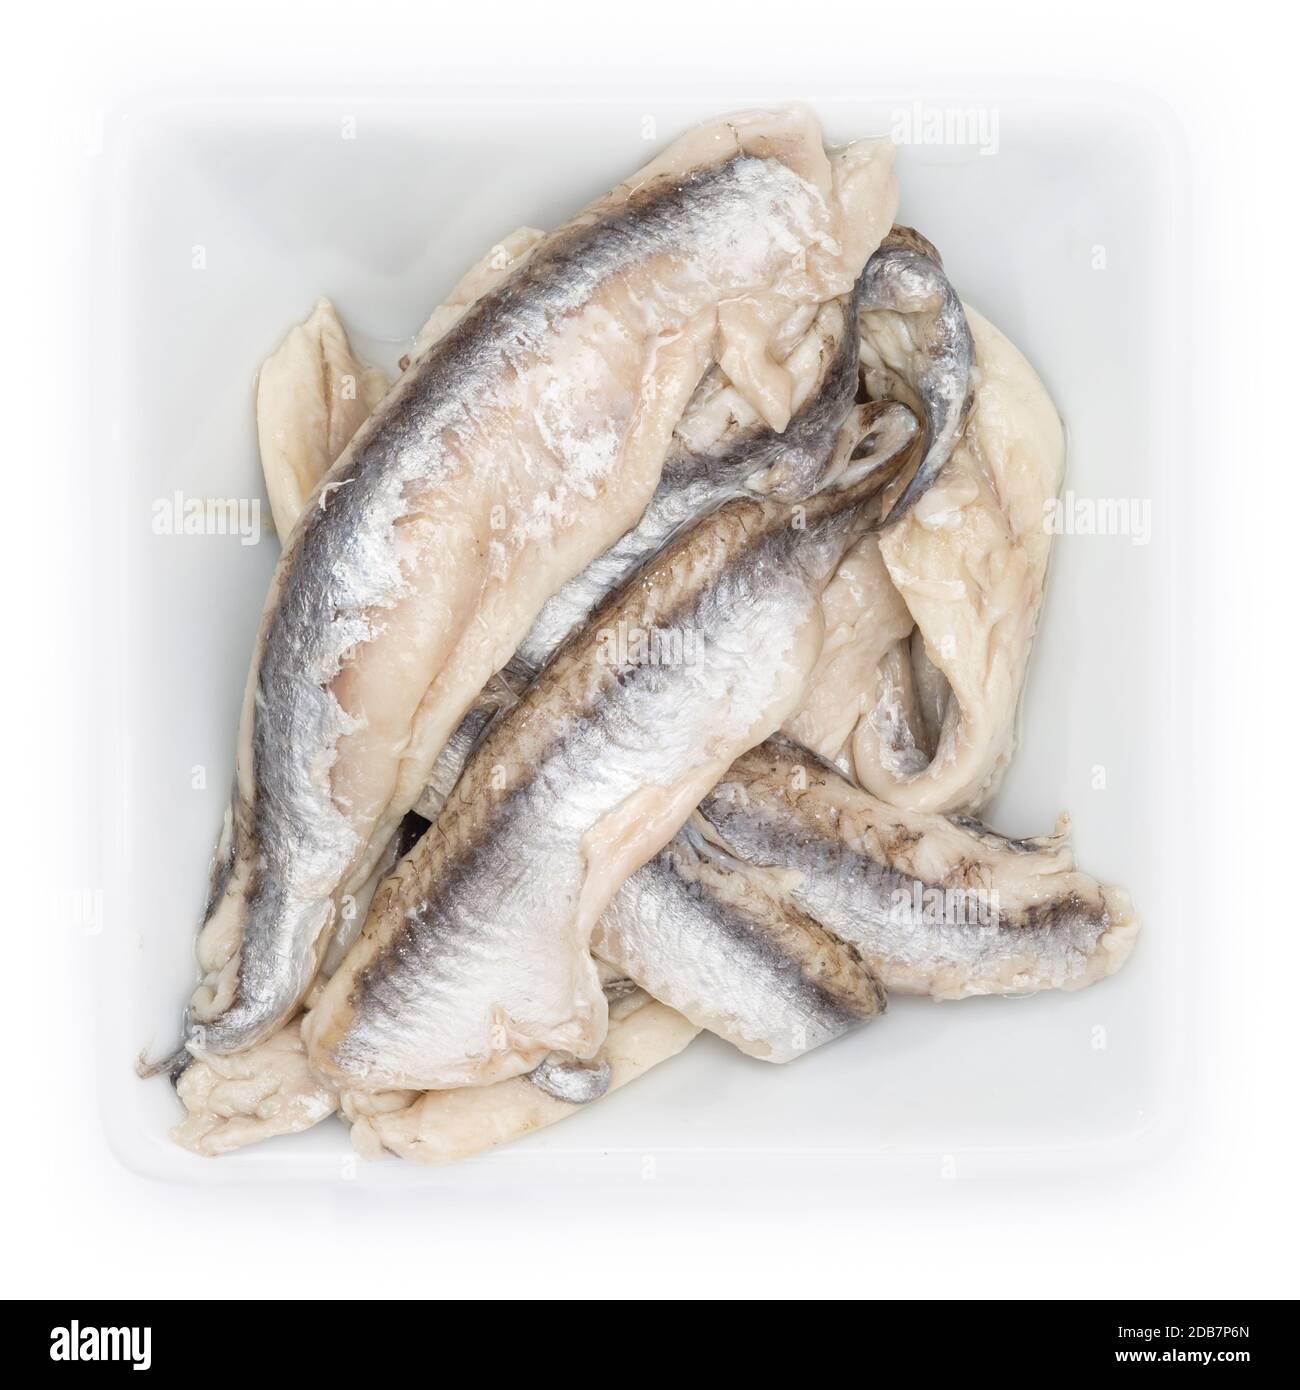 Sardine anchovy fish raw in a white bowl in top view Stock Photo